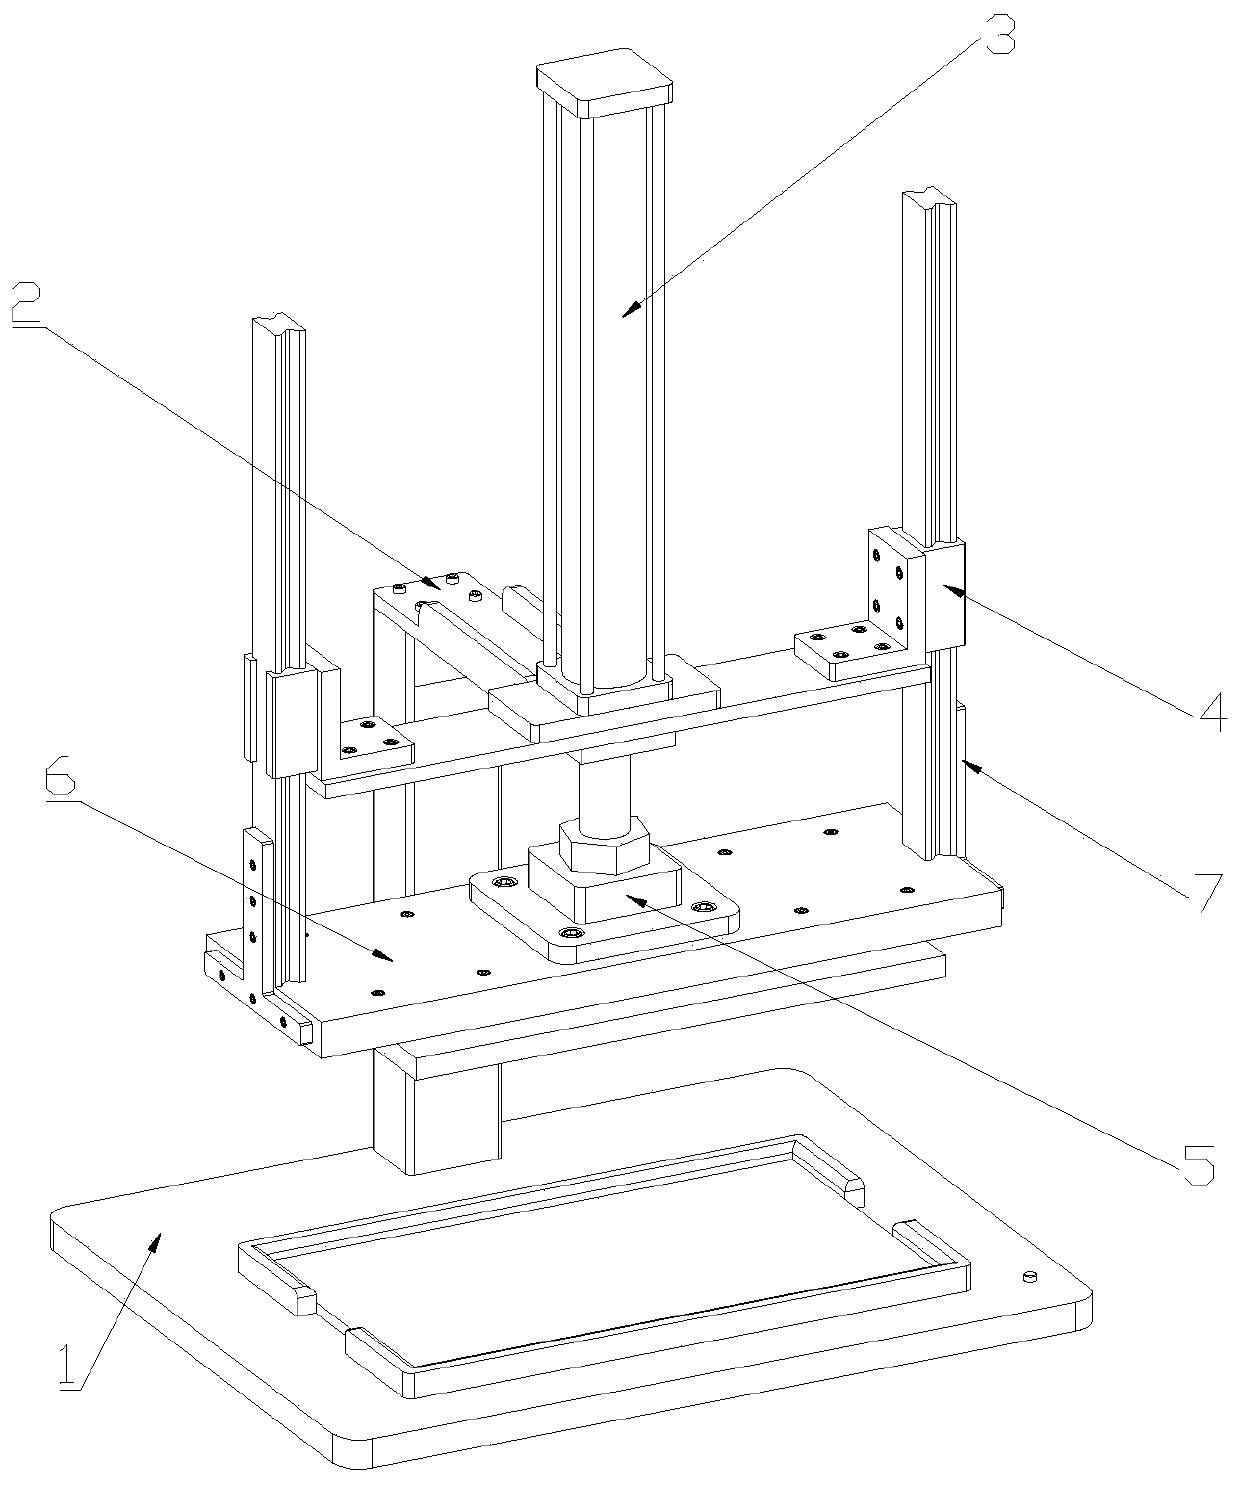 Hollow square-shaped adhesive pressing fixture